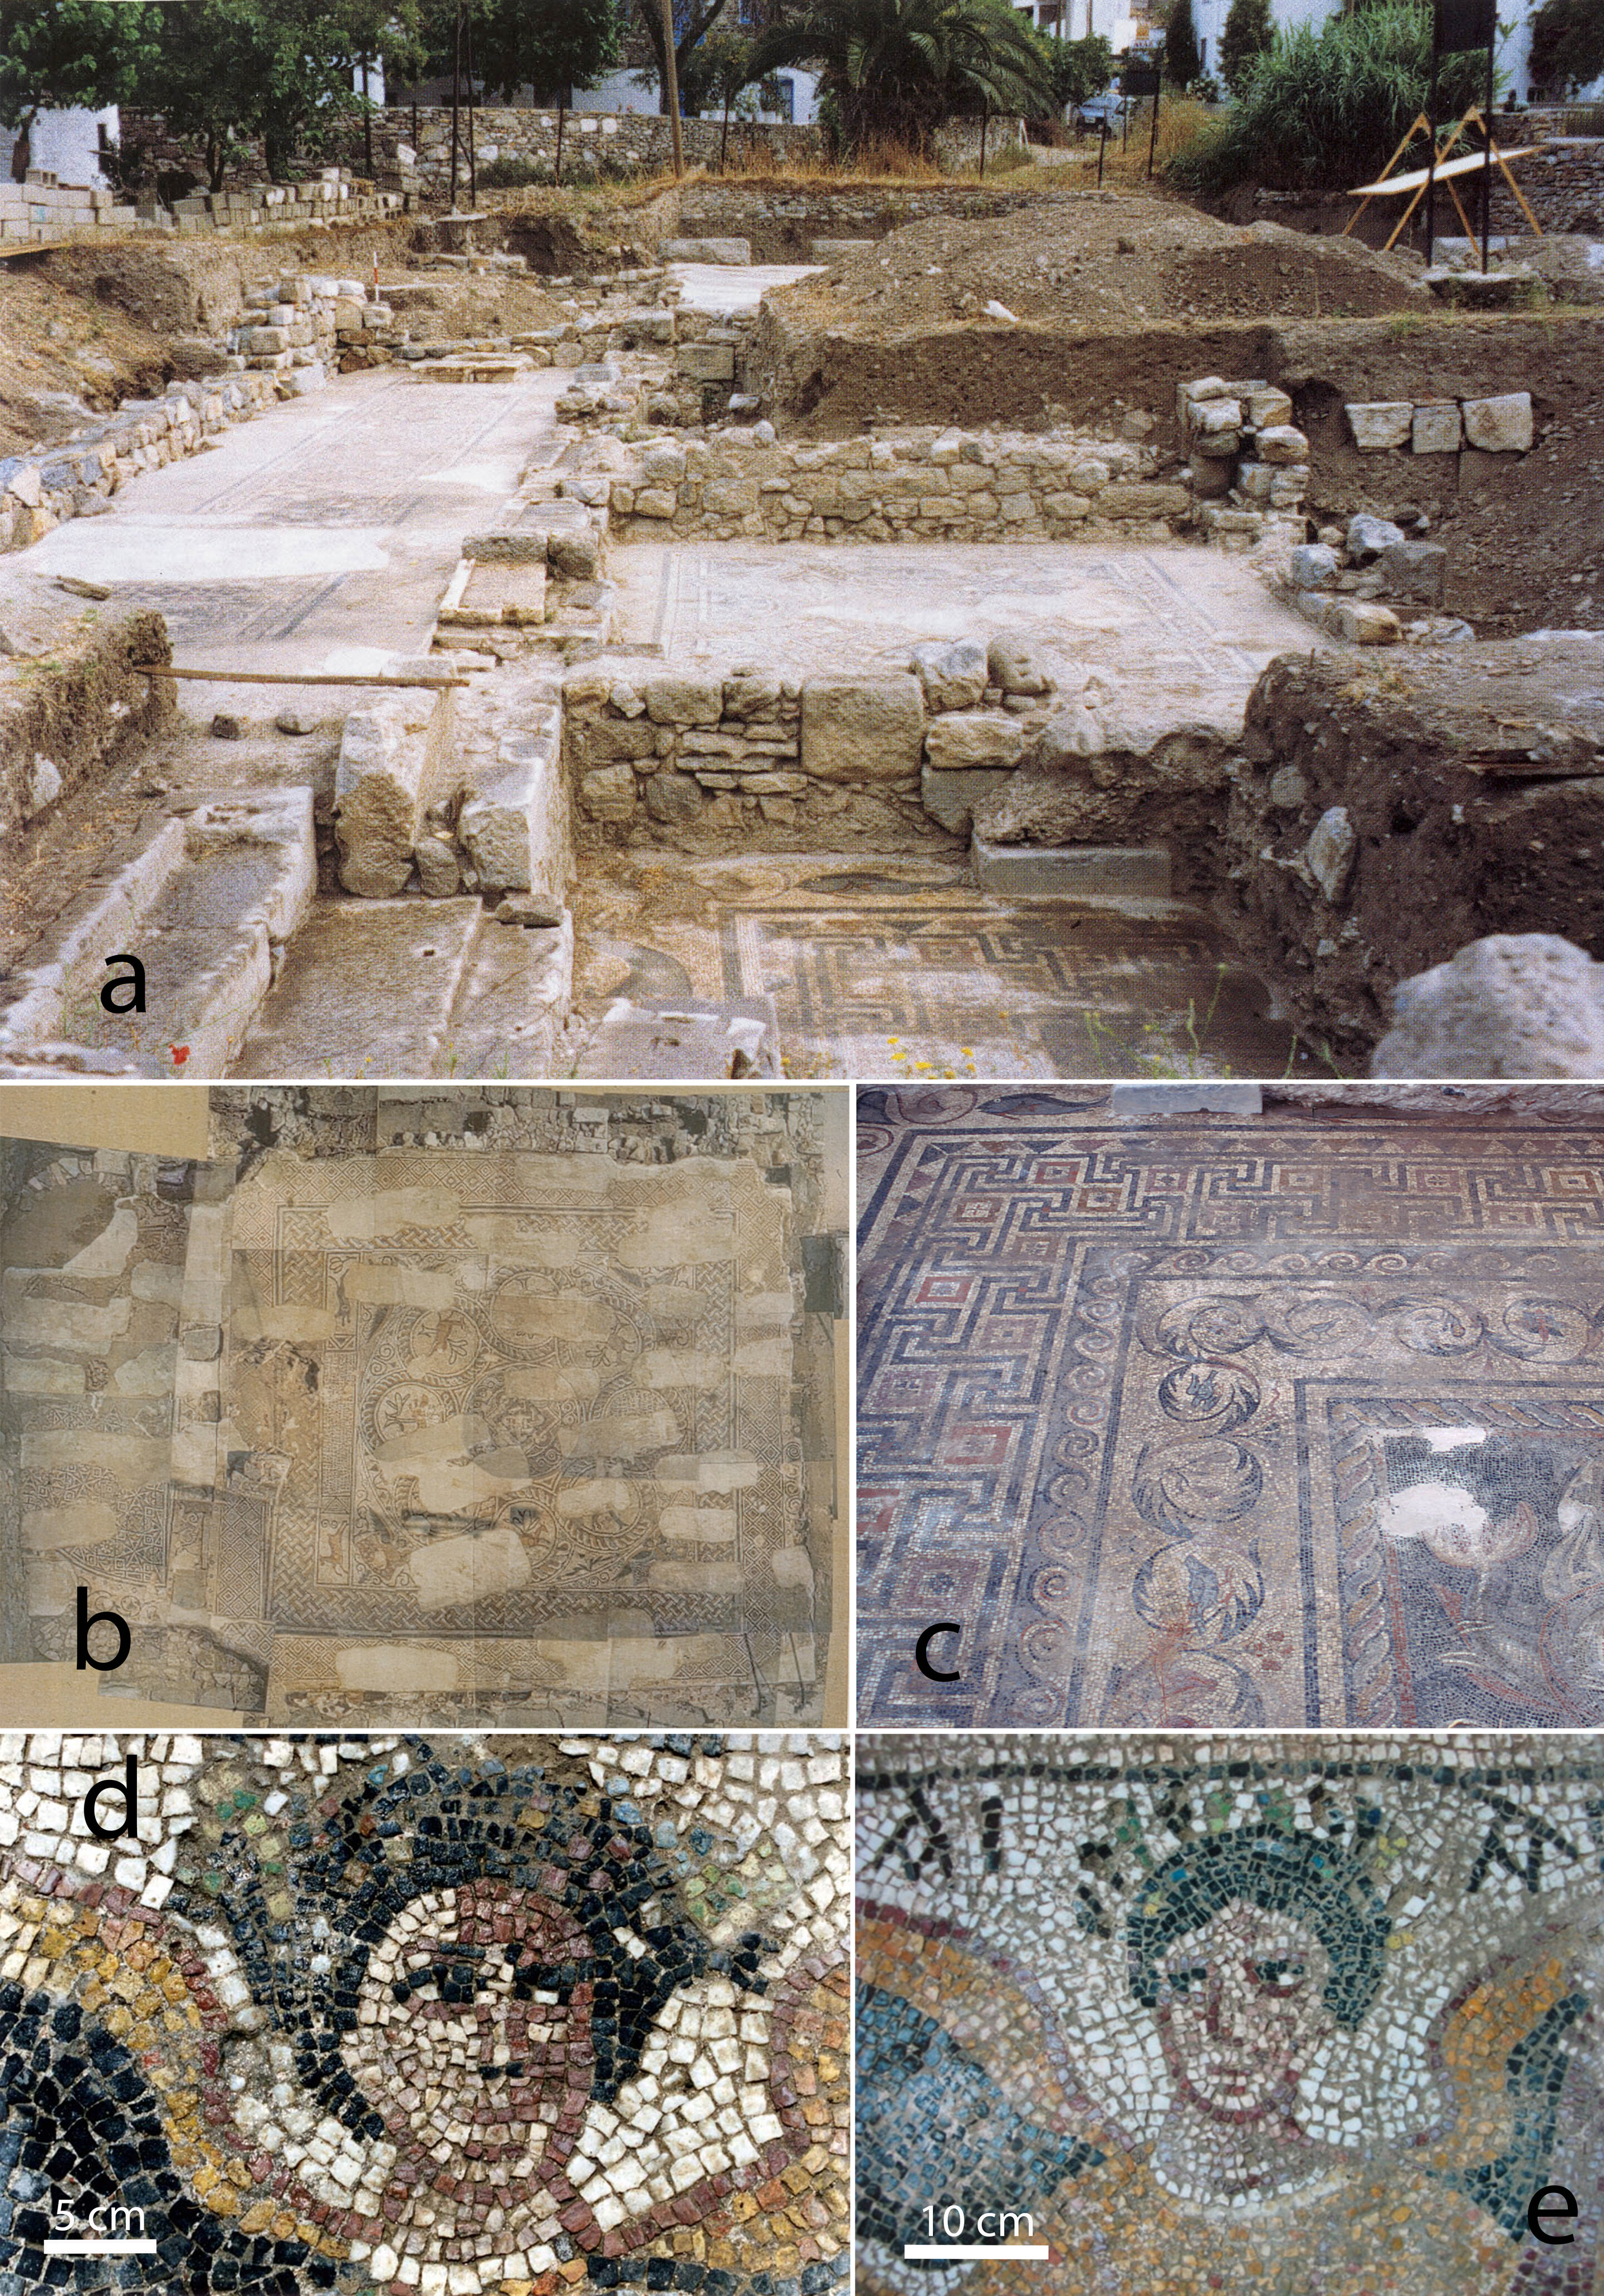 Excavation and mosaic floors of villa. Credit: University of Southern Denmark